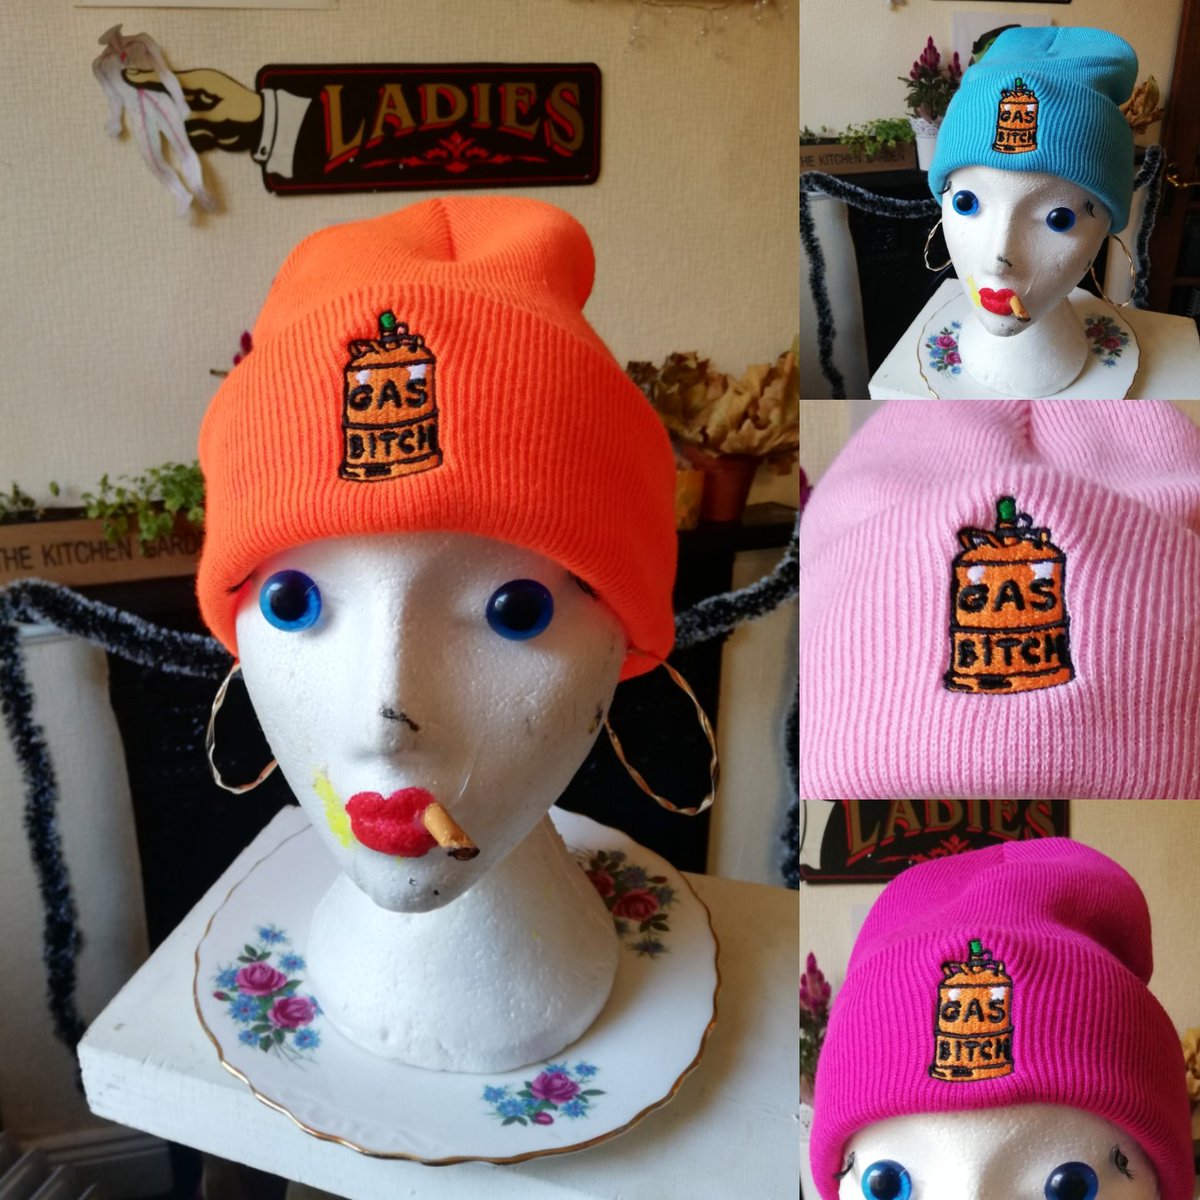 *NEW PRODUCT* 
Gas Bitch Beanie Hats YAY!
SO DELIGHTED with these! 
They are very cosy! 

Shop link in comments
#irishdesign #irishdesigner #hat #hats #beanie  #staywarm #christmasmarket #christmaspresent #irishgift #gas #gasbitch #colourful #shoplocalthischristmas #shoplocal